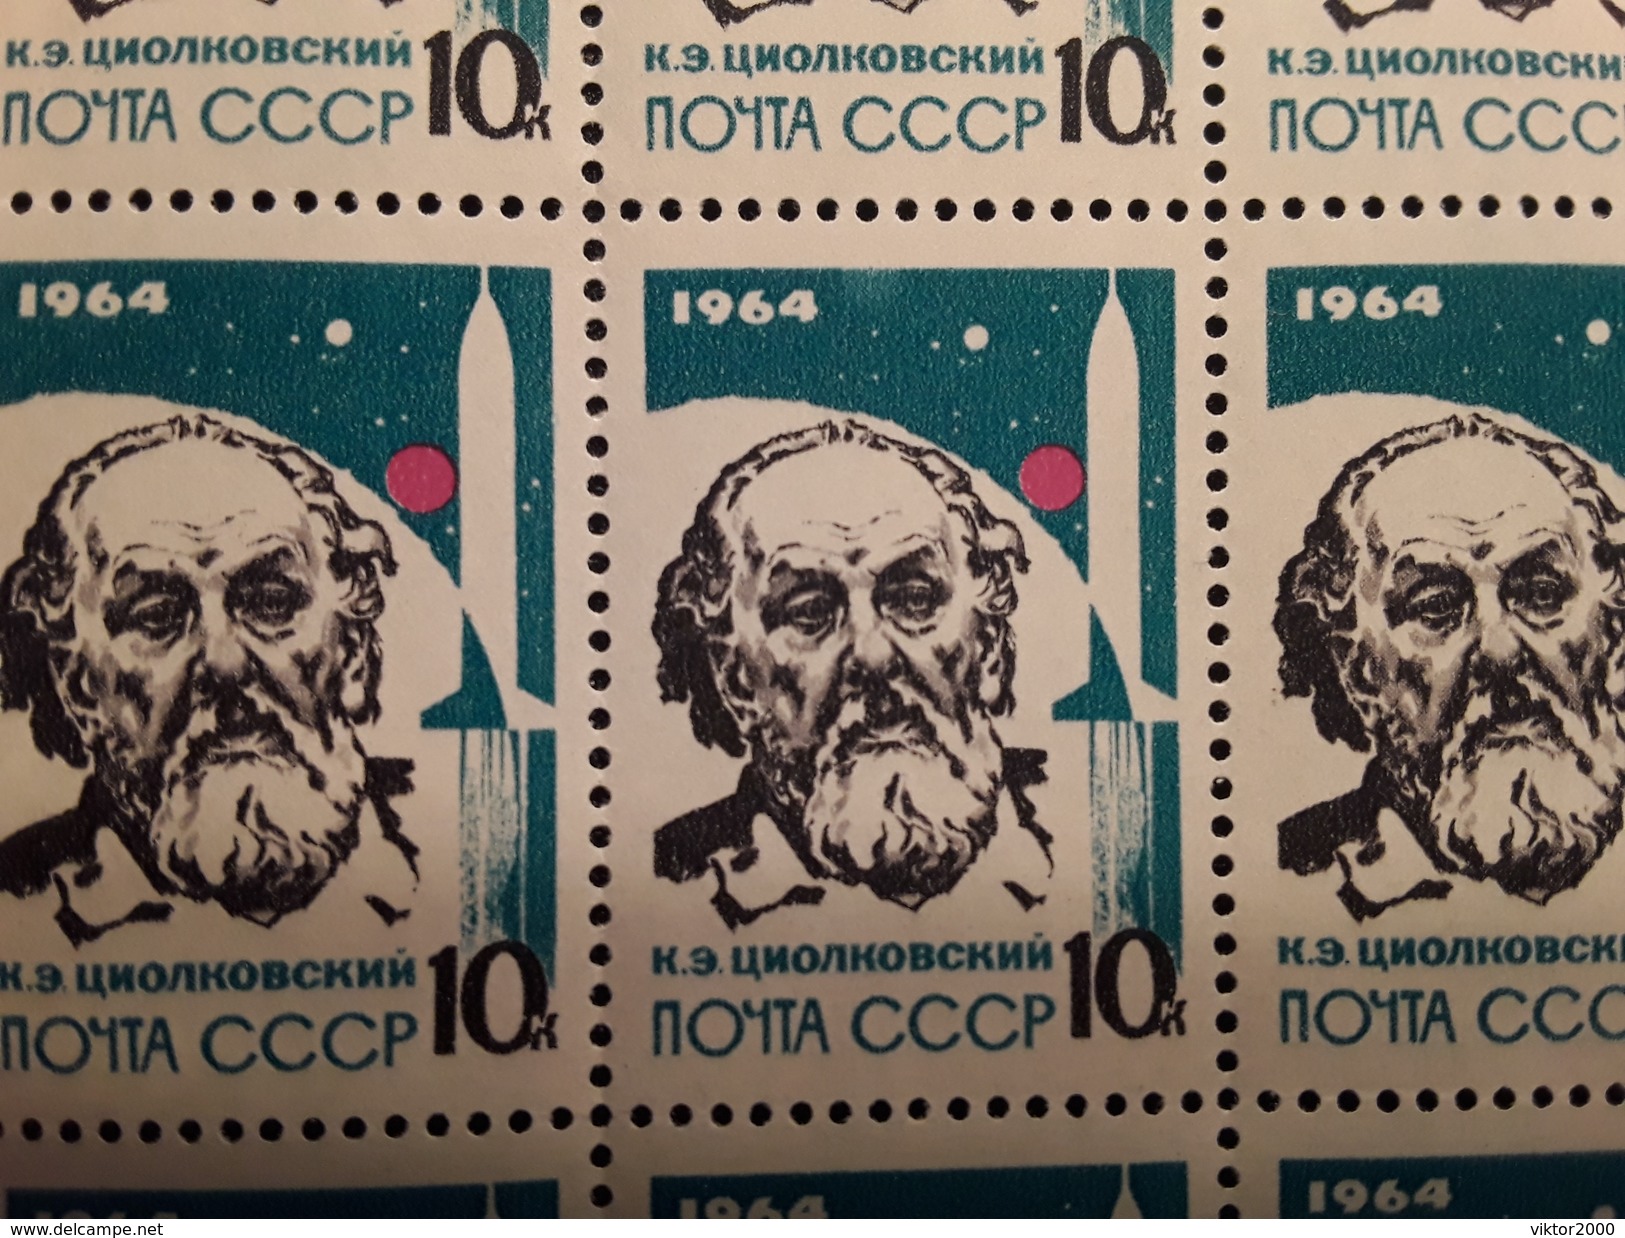 RUSSIA 1964 MNH (**)MICHEL 2900 The Founder Of Rocketry.Tsiolkovsky - Full Sheets